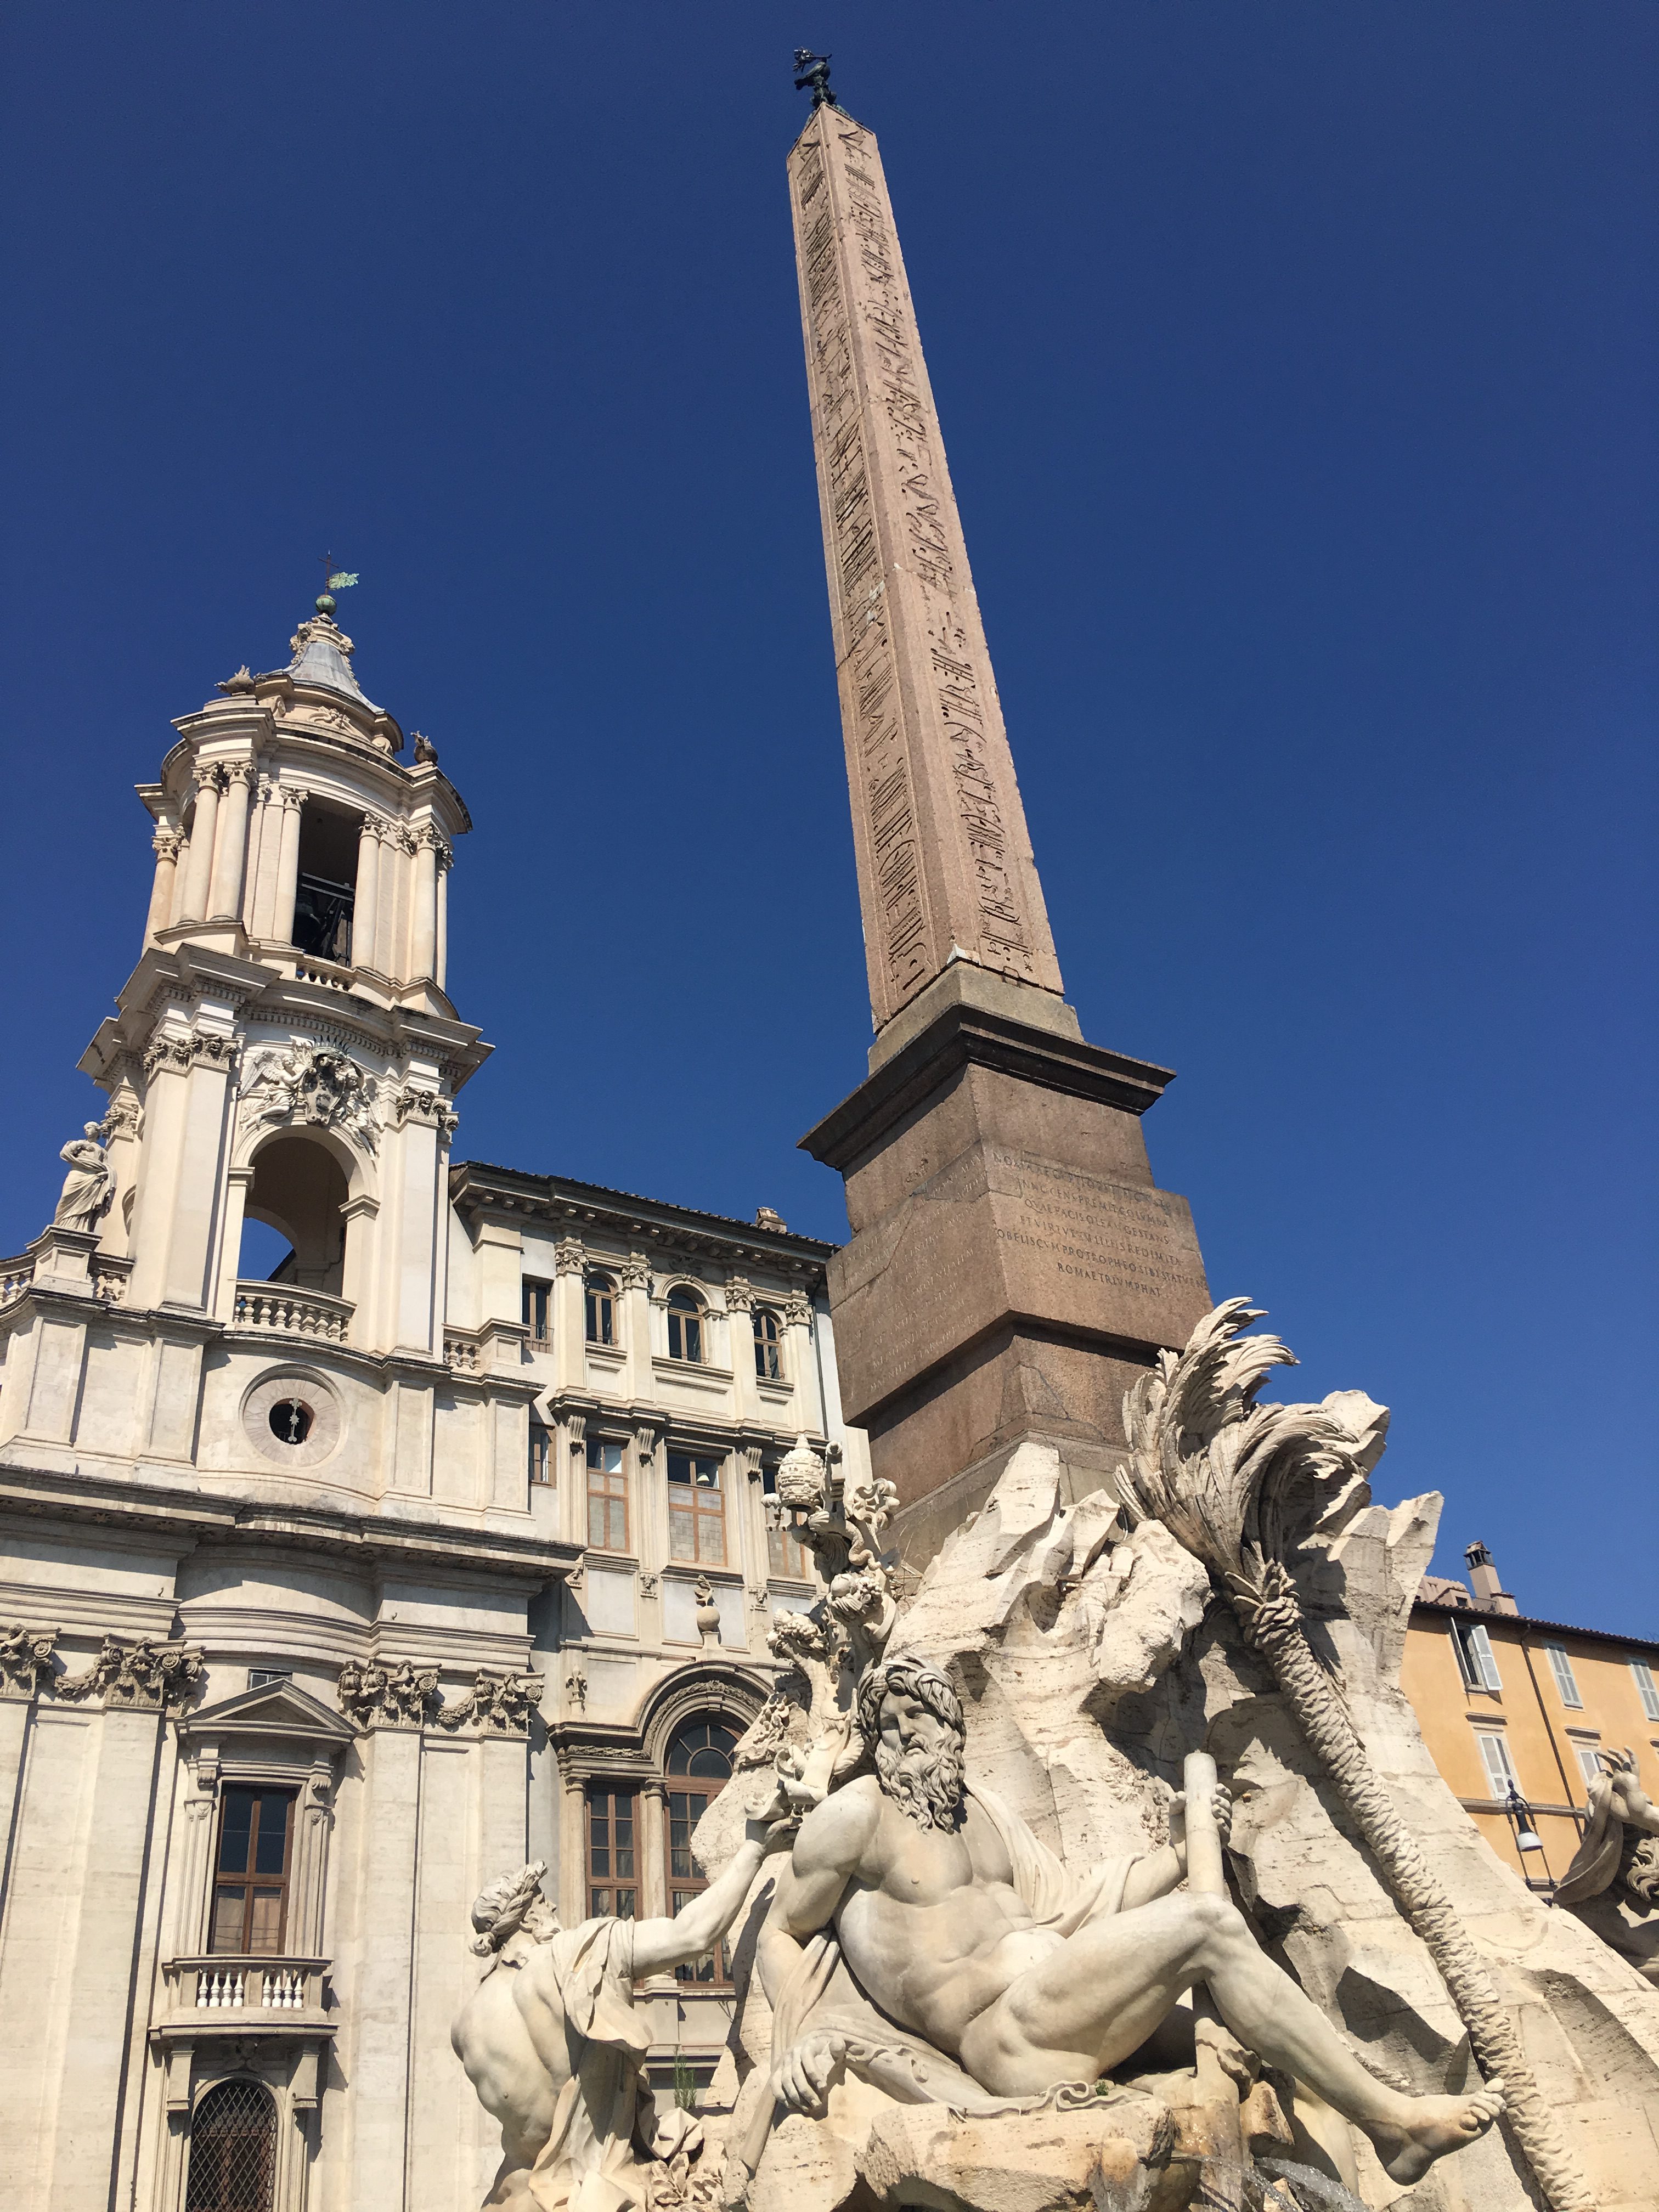 Fountain in Piazza Navona